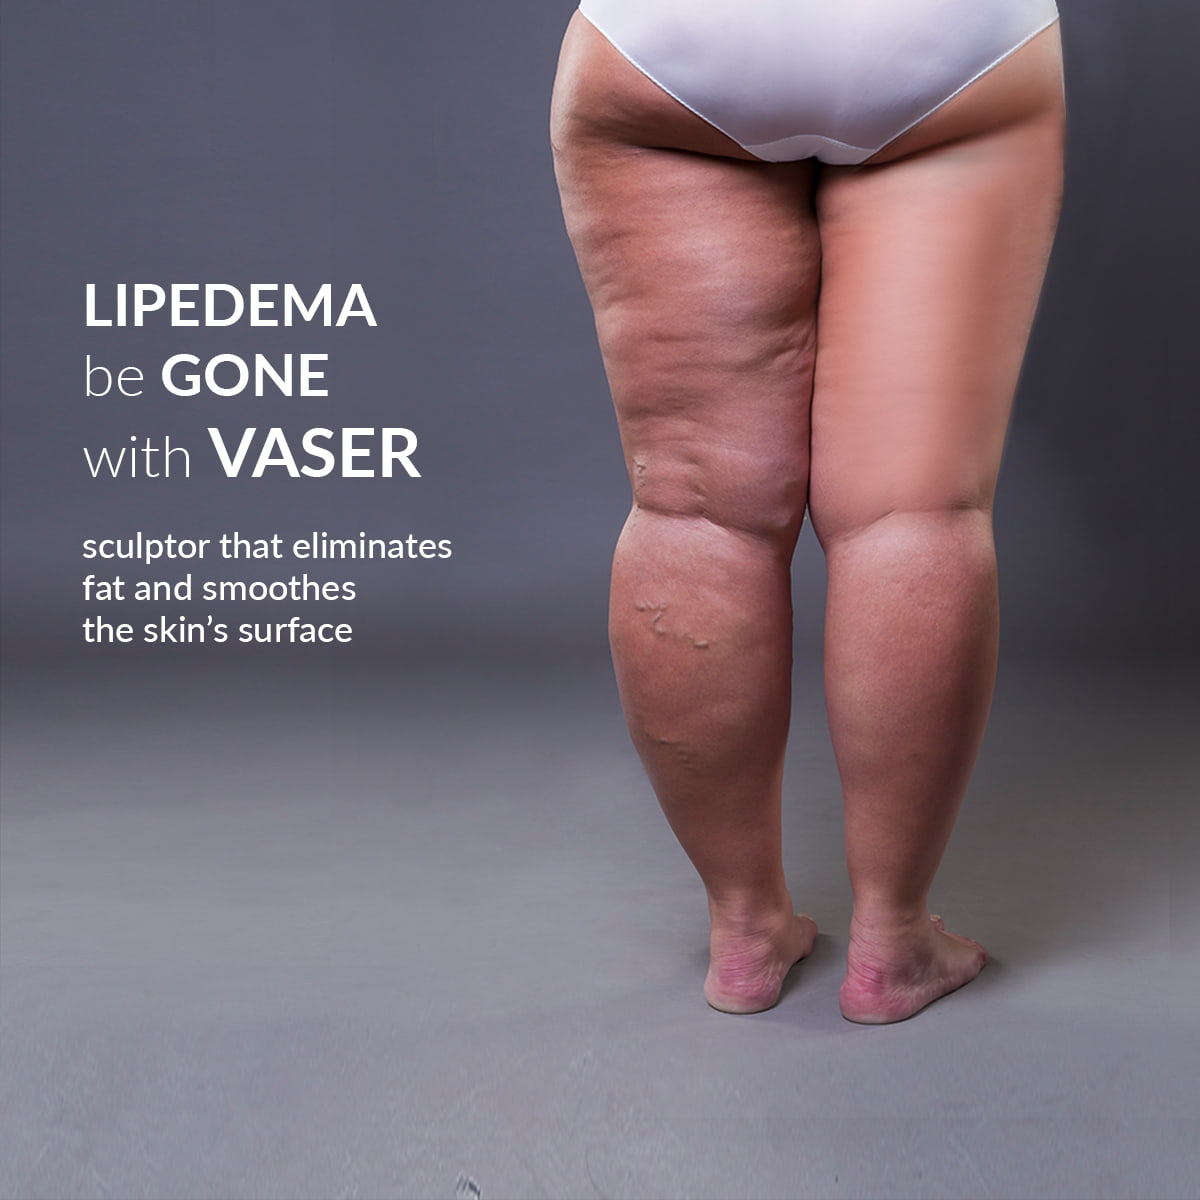 How can i know if ihave Lipedema? Diagnosis and test